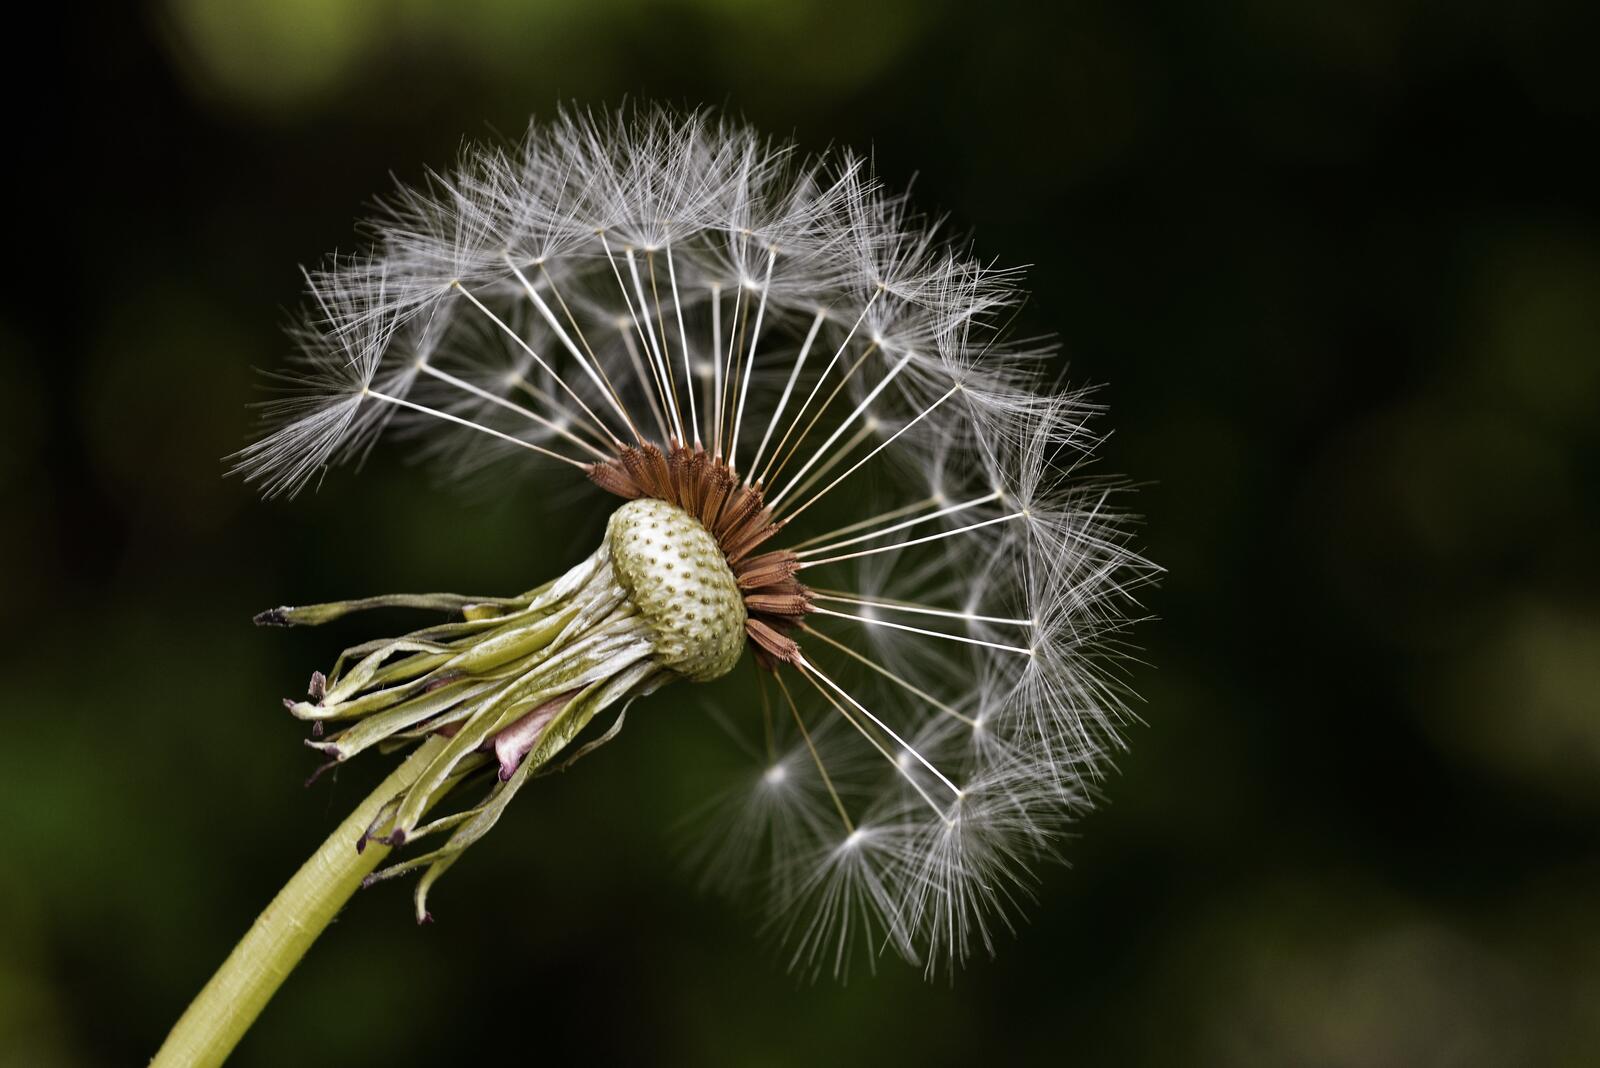 Free photo Wallpaper with a close-up image of a dandelion